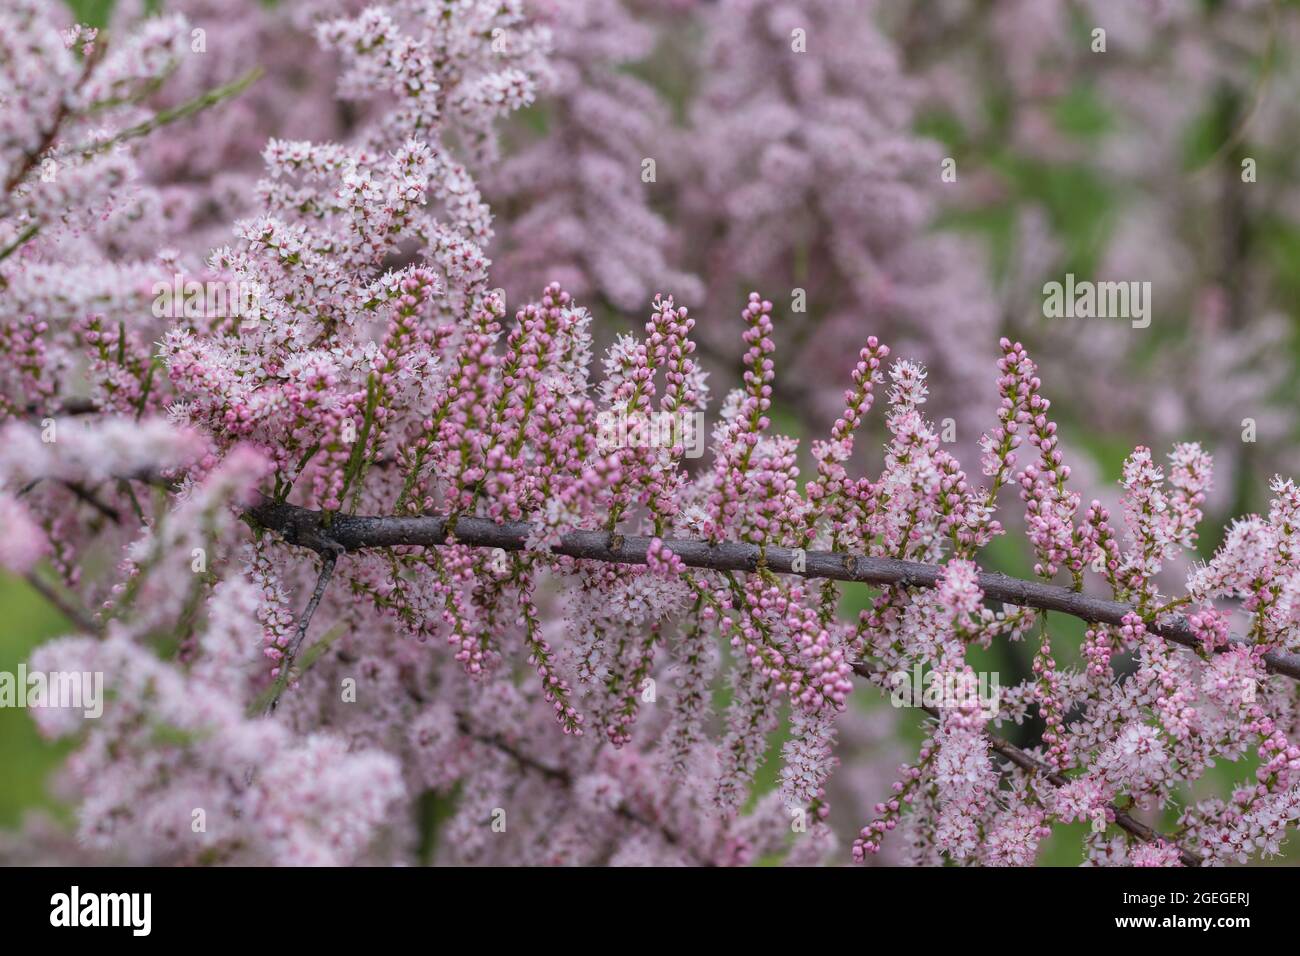 Soft blooming of Tamarix or tamarisk plant with pink flowers Stock Photo